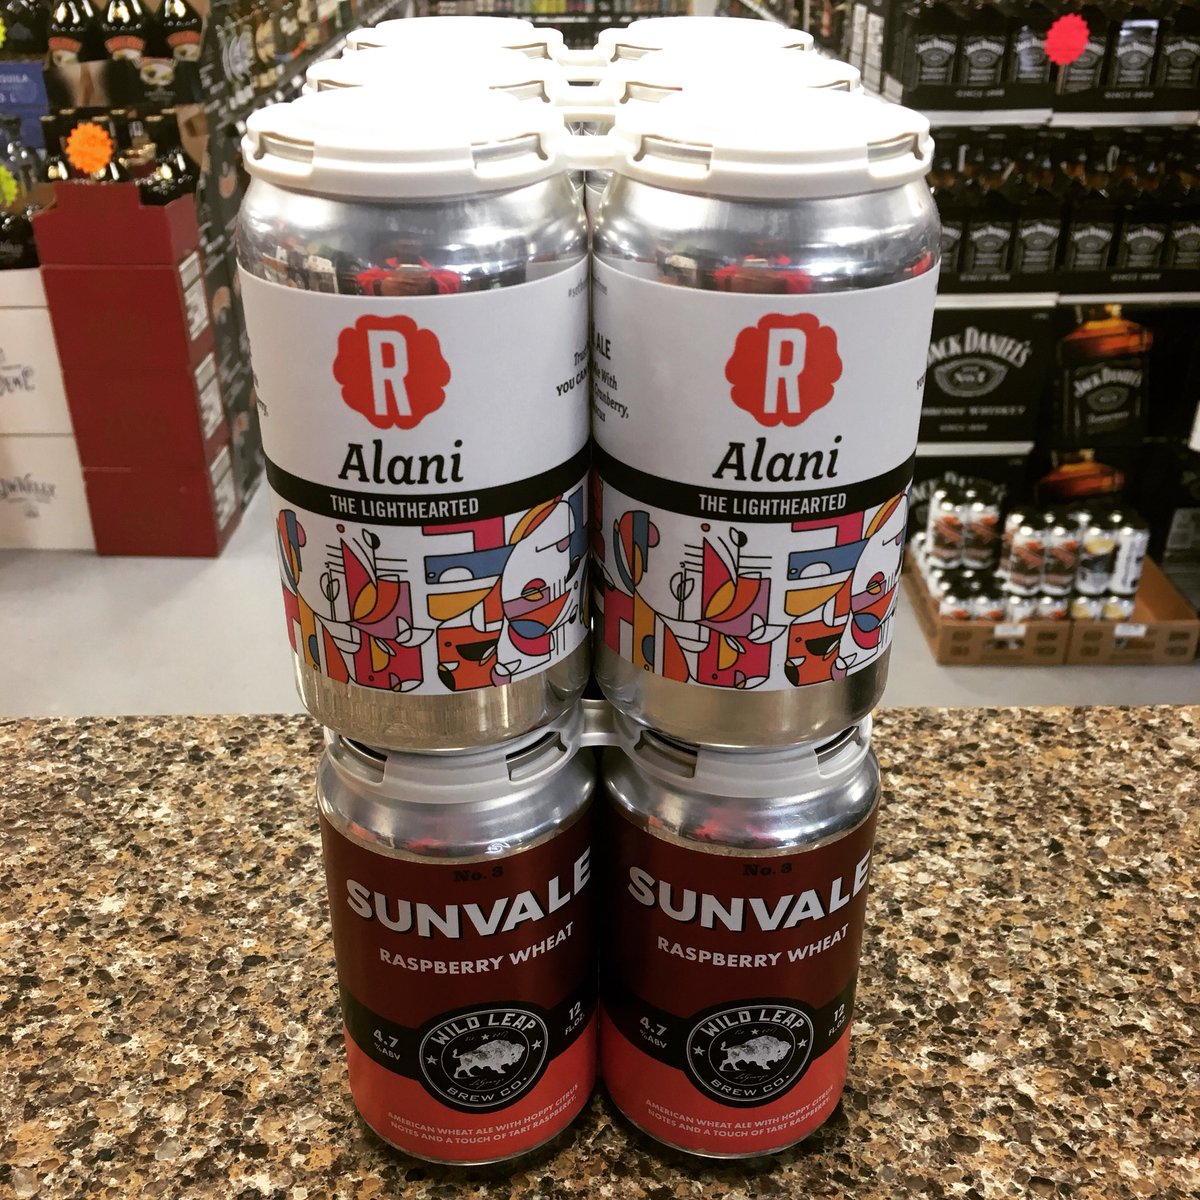 Reformation Alani and Wild Leap Sunvale #gabeer #drinklocal #setbeerfree